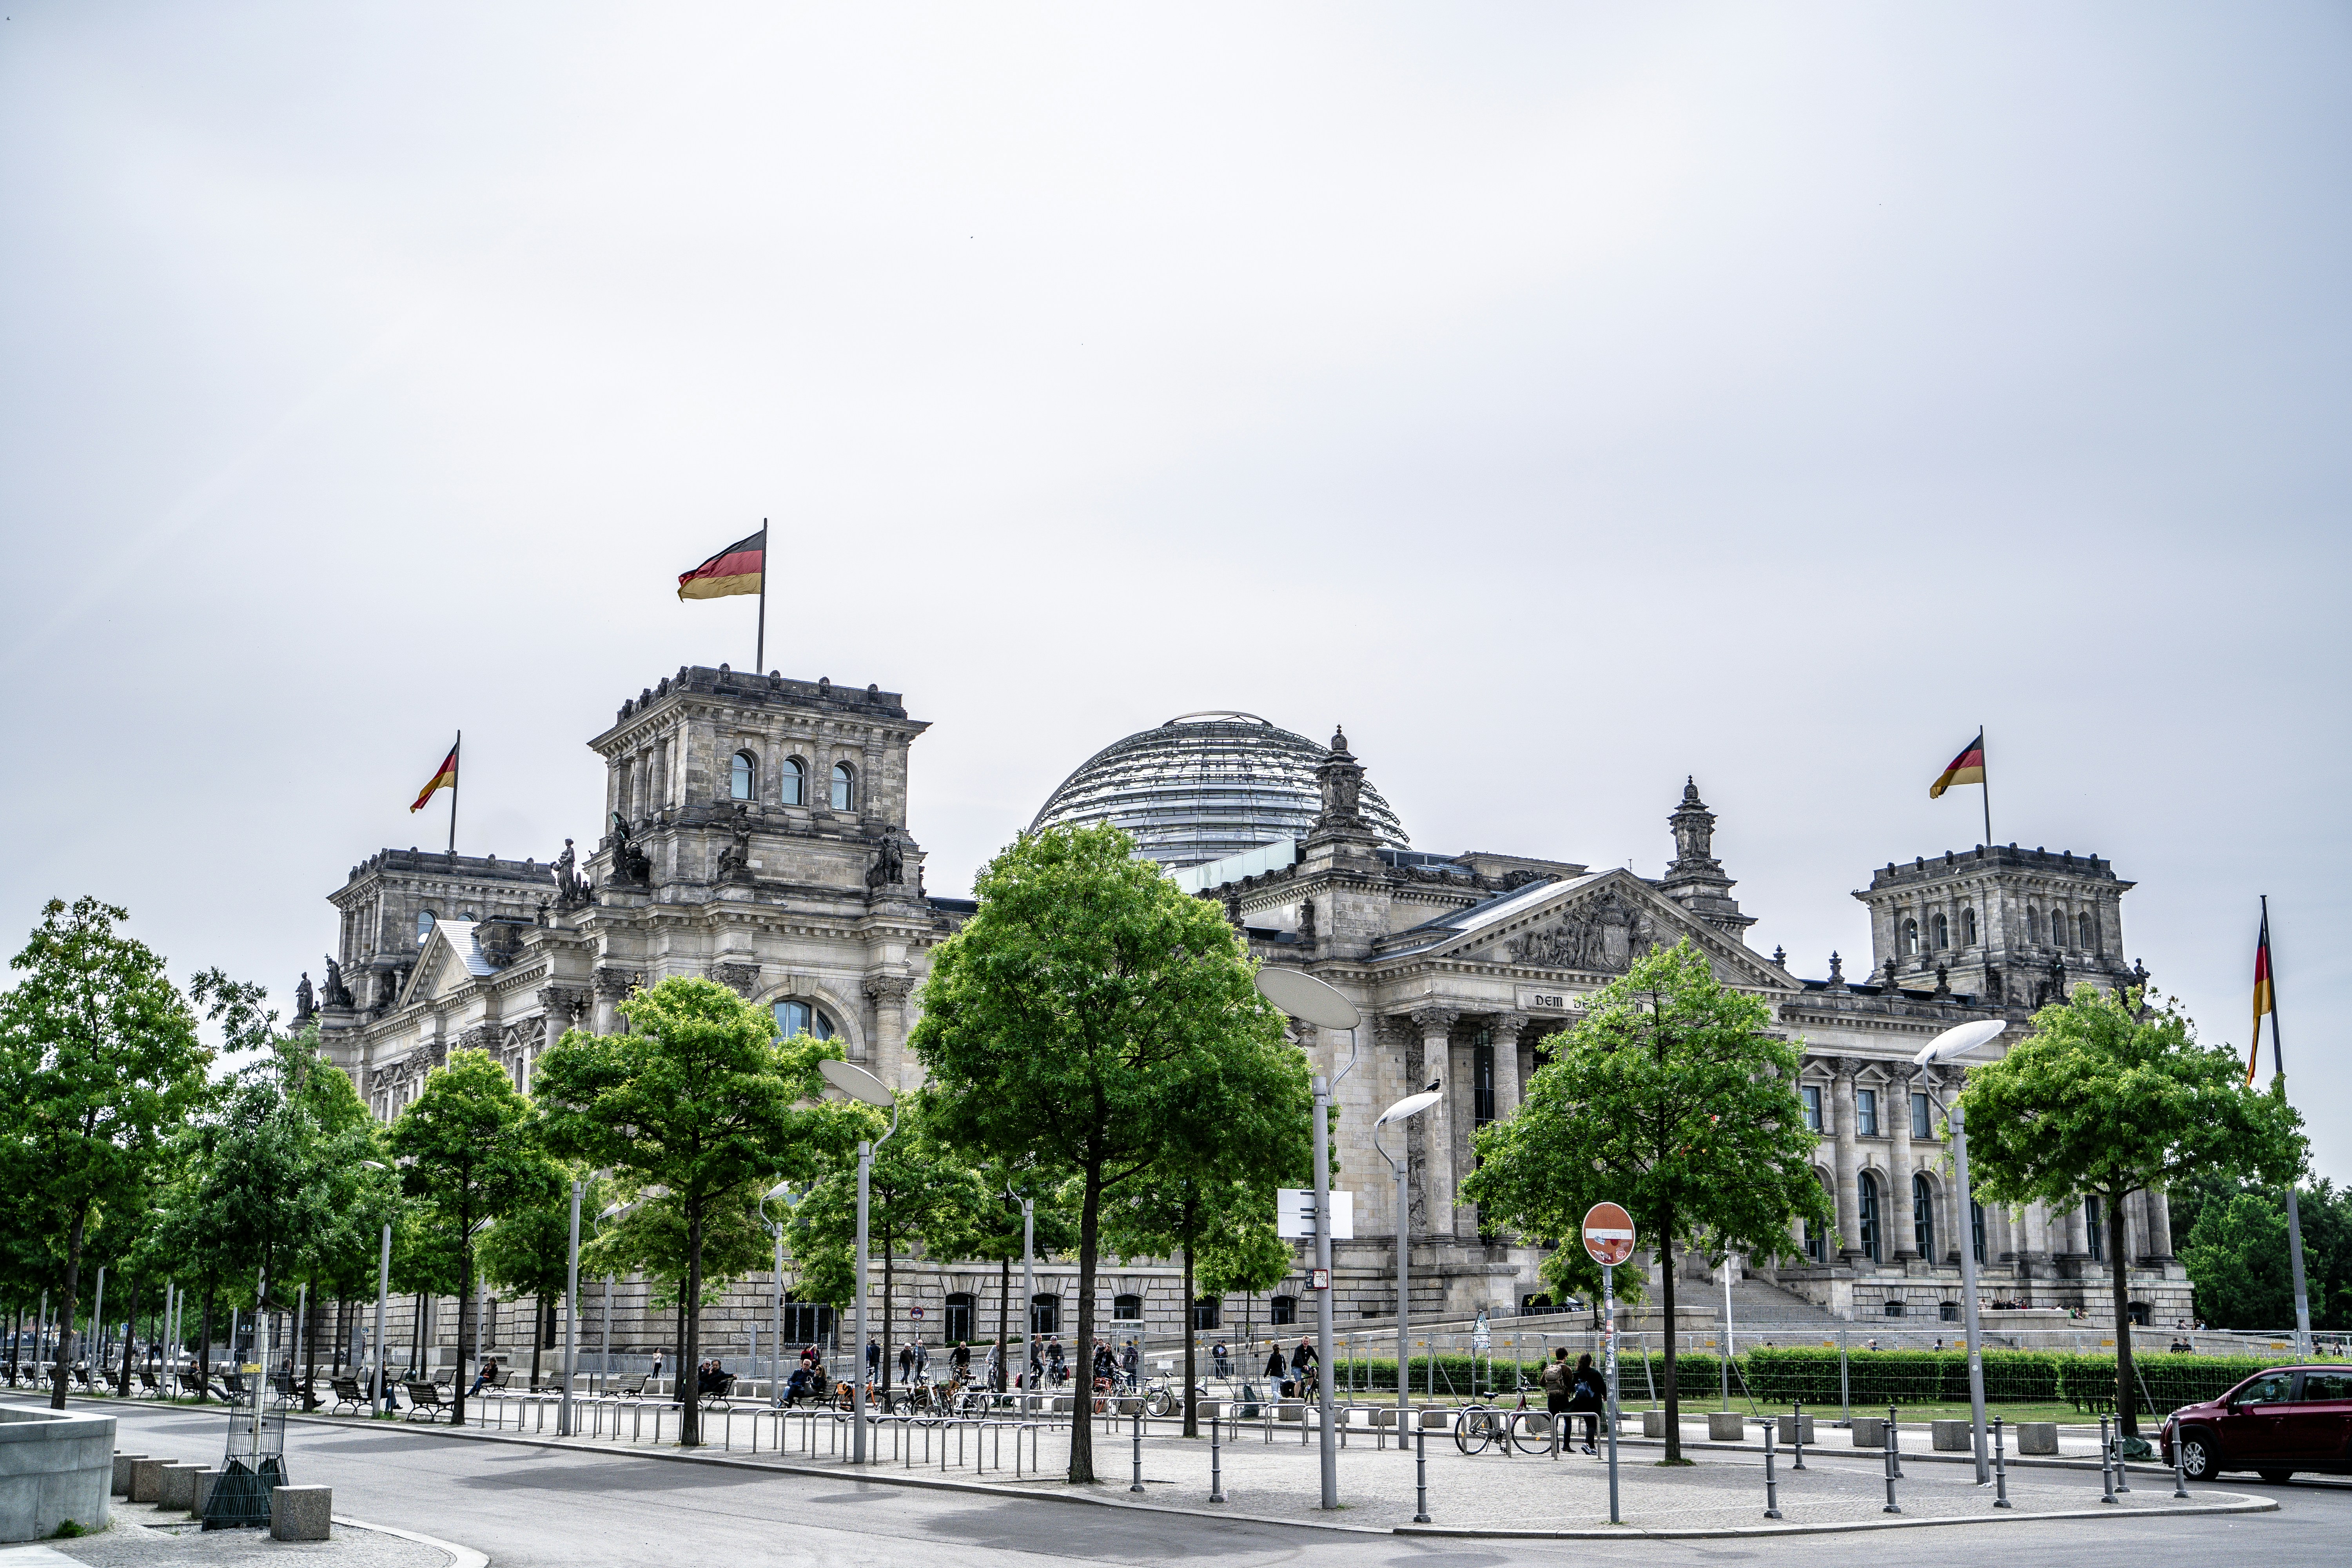 View of famous Reichstag building in Berlin, Germany.